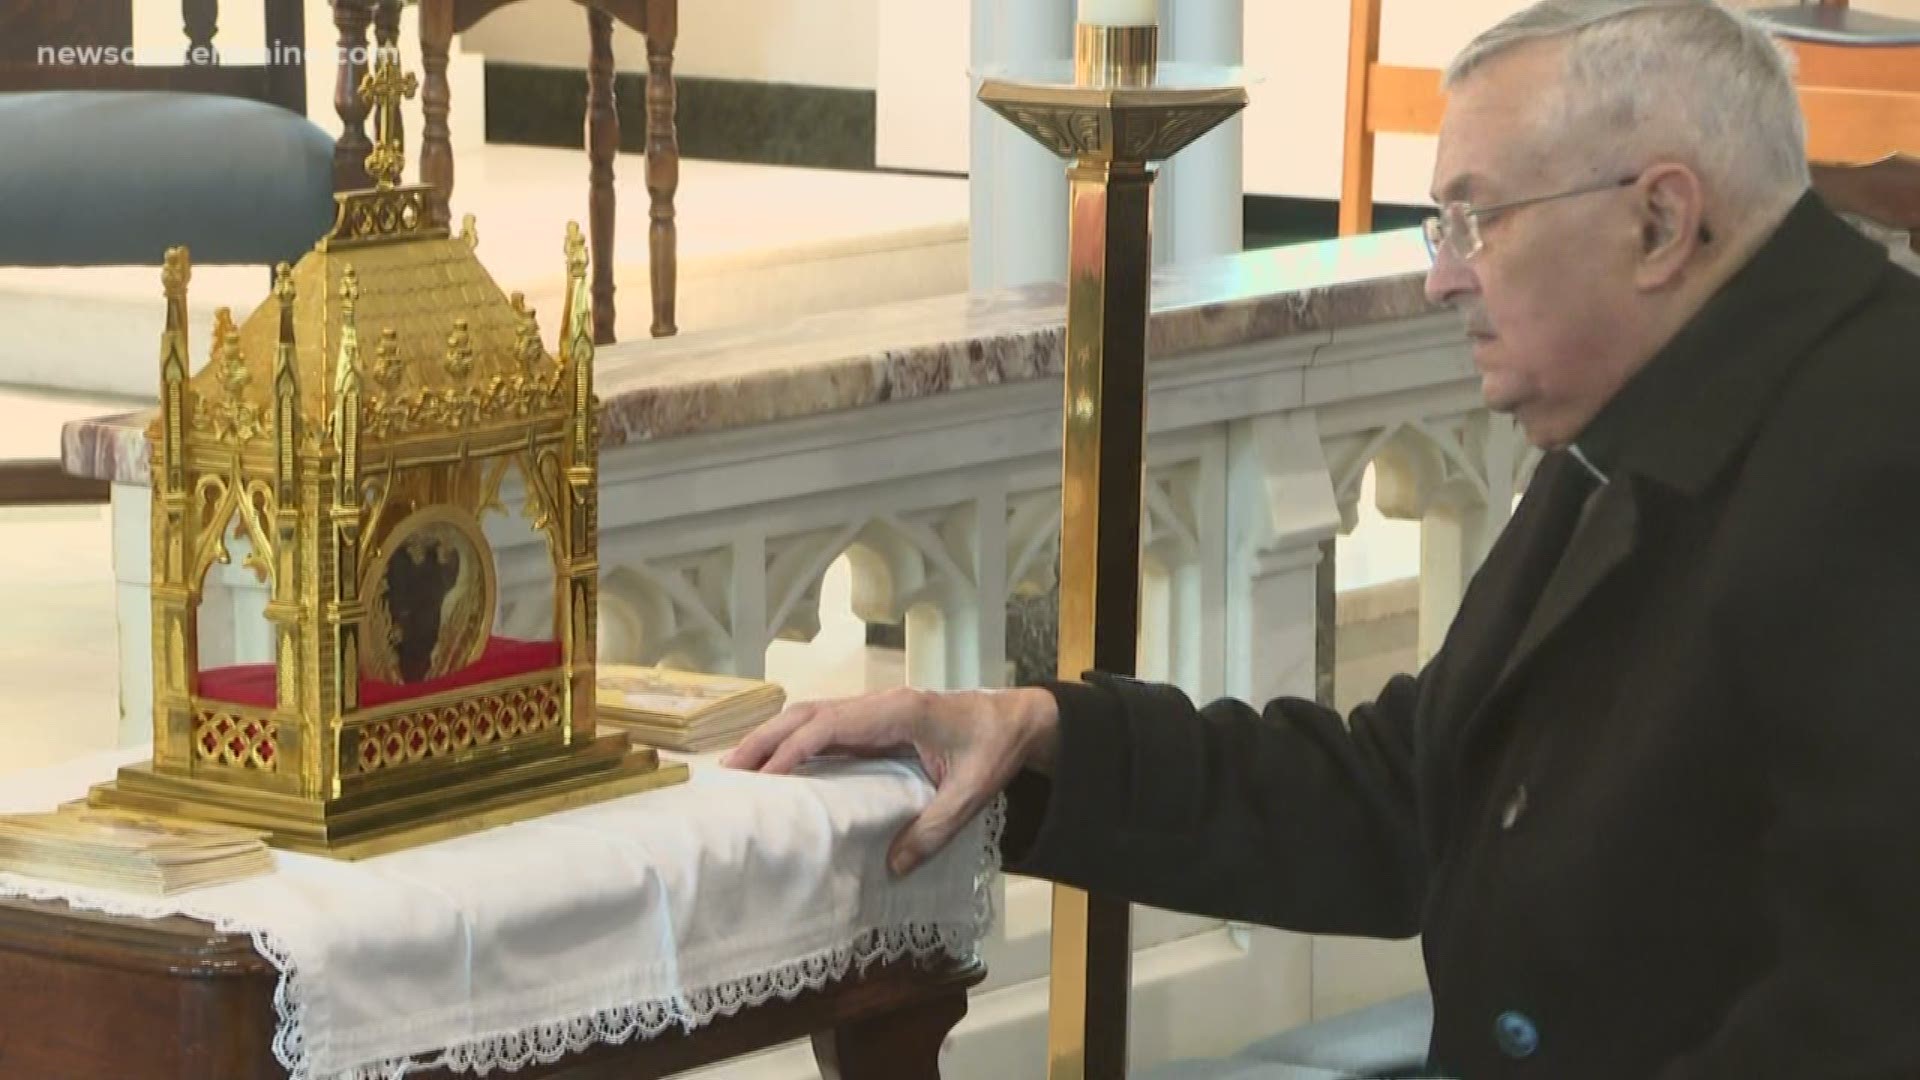 Catholics paid they respects to Saint Jean Vianney's Incorrupt Heart at Immaculate Conception in Portland on Tuesday.